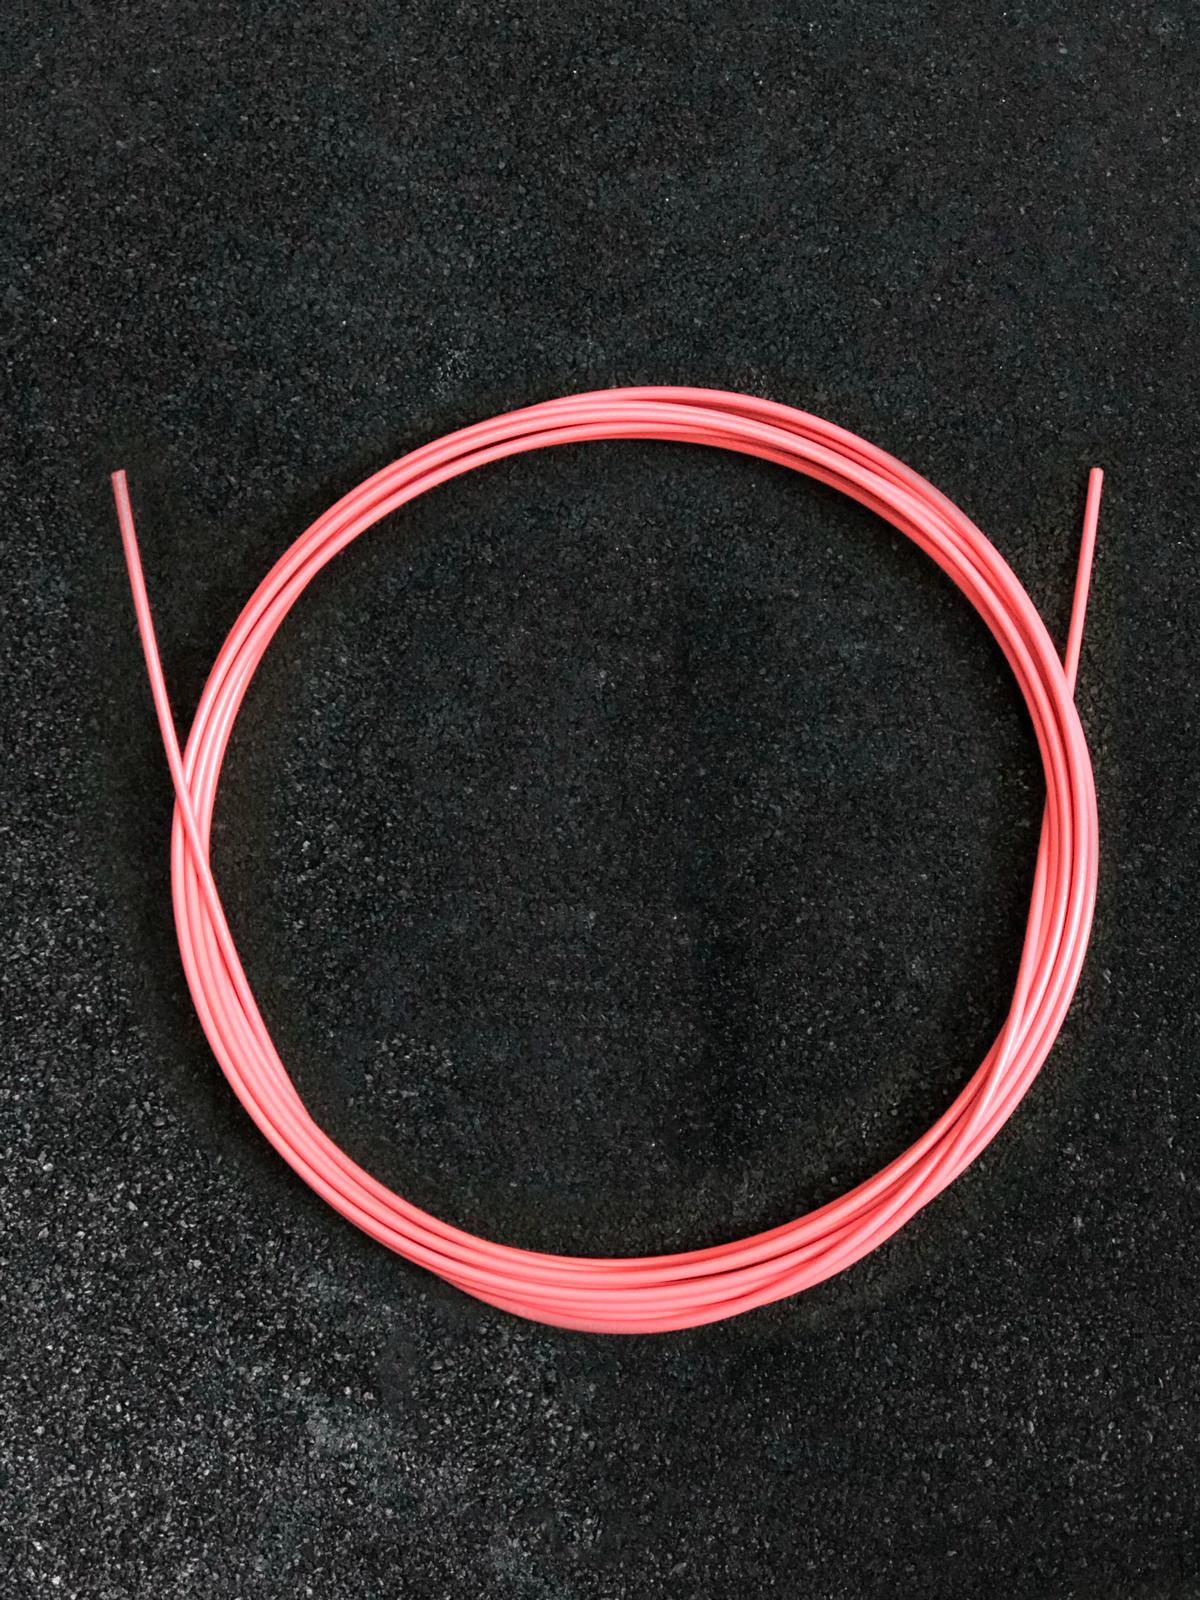 urope-cable-pink